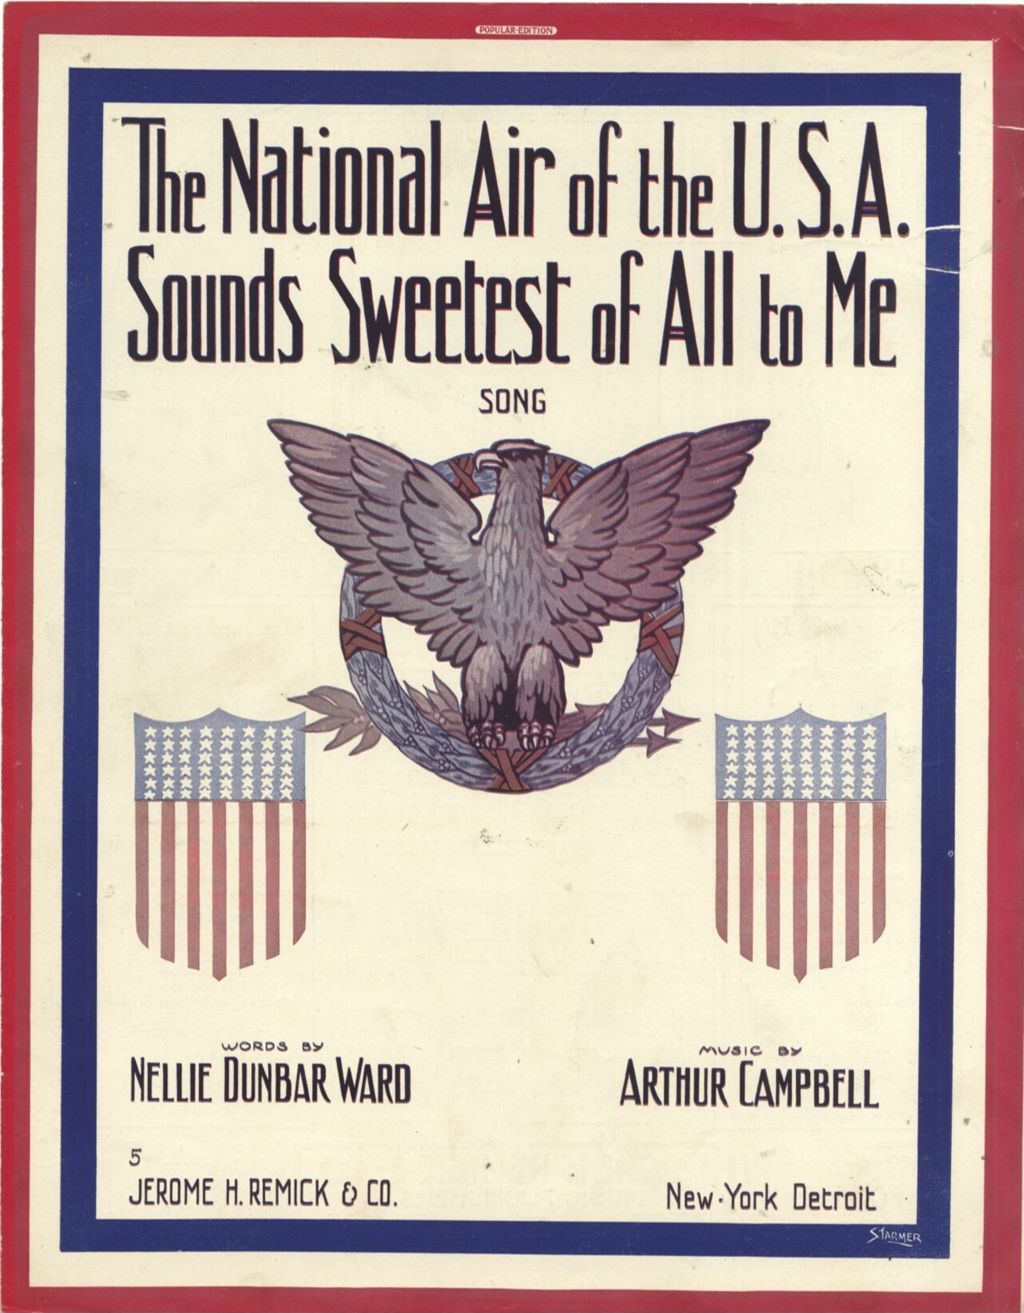 National Air of the U.S.A. Sounds Sweetest of All To Me